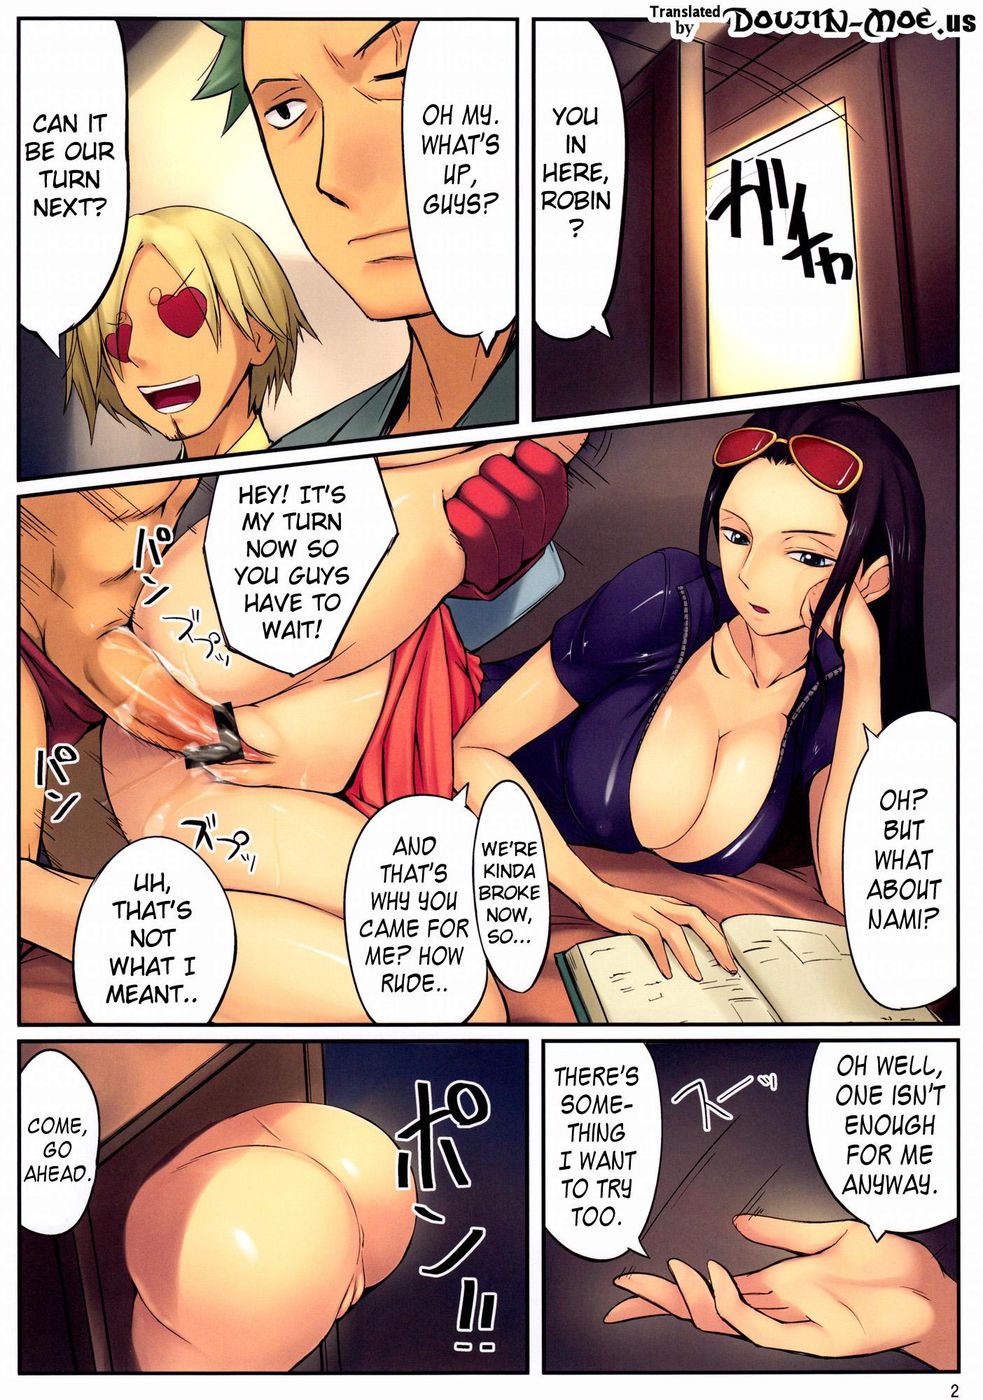 One Piece Pixxx Robin Porn - Read Rob One Piece Hentai Online Porn Manga And Doujinshi | Free Hot Nude  Porn Pic Gallery